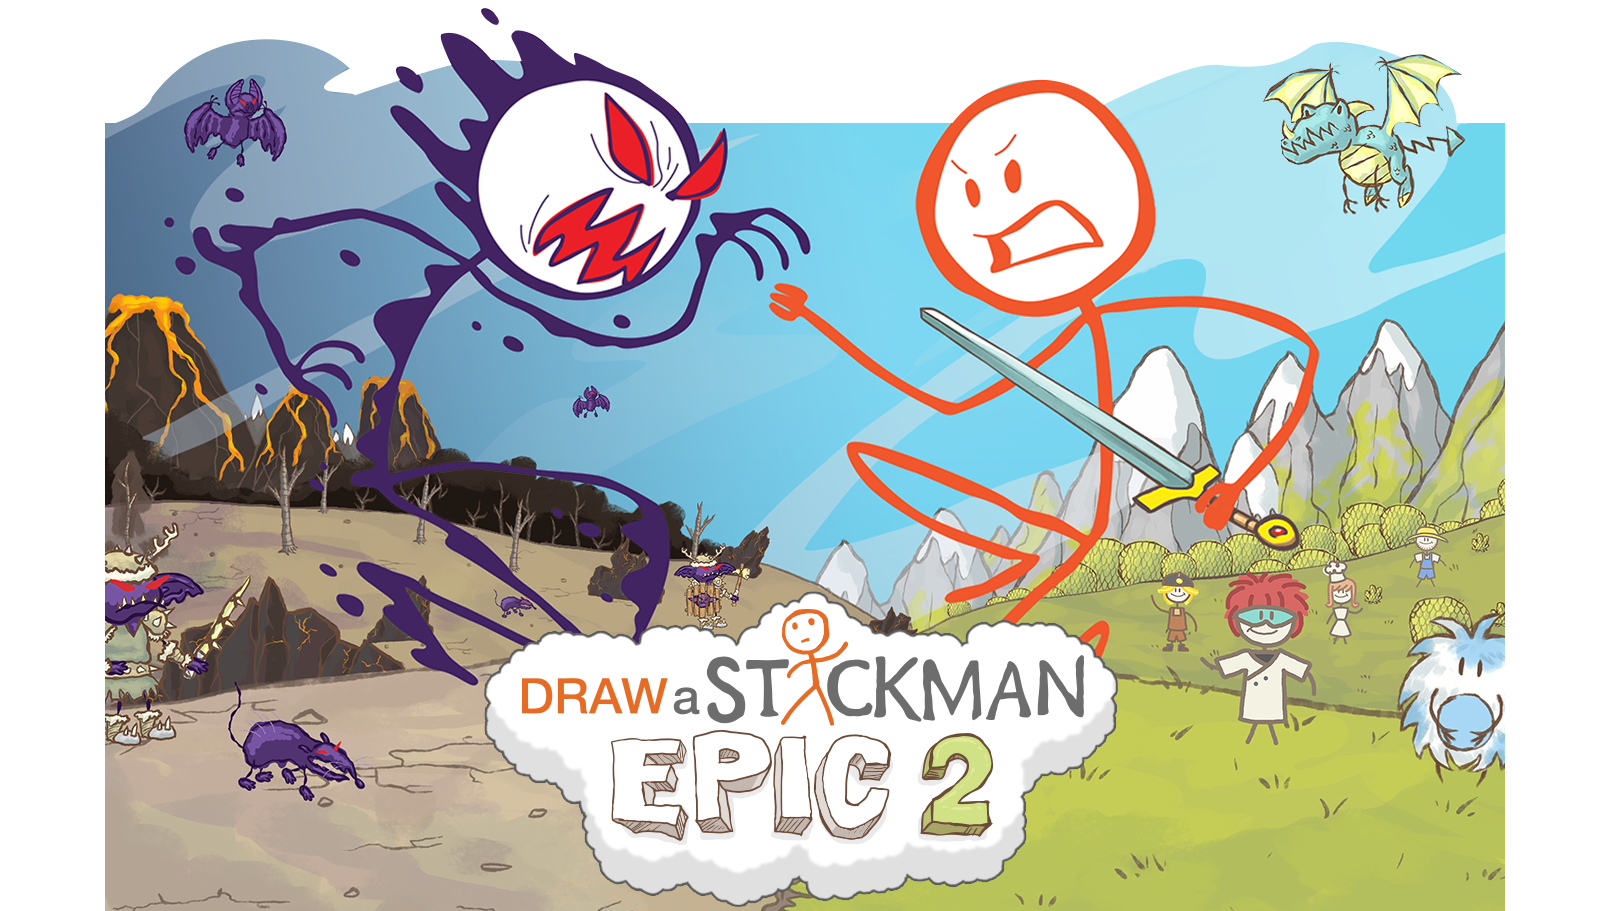 Draw A Stickman:Amazon.com:Appstore for Android